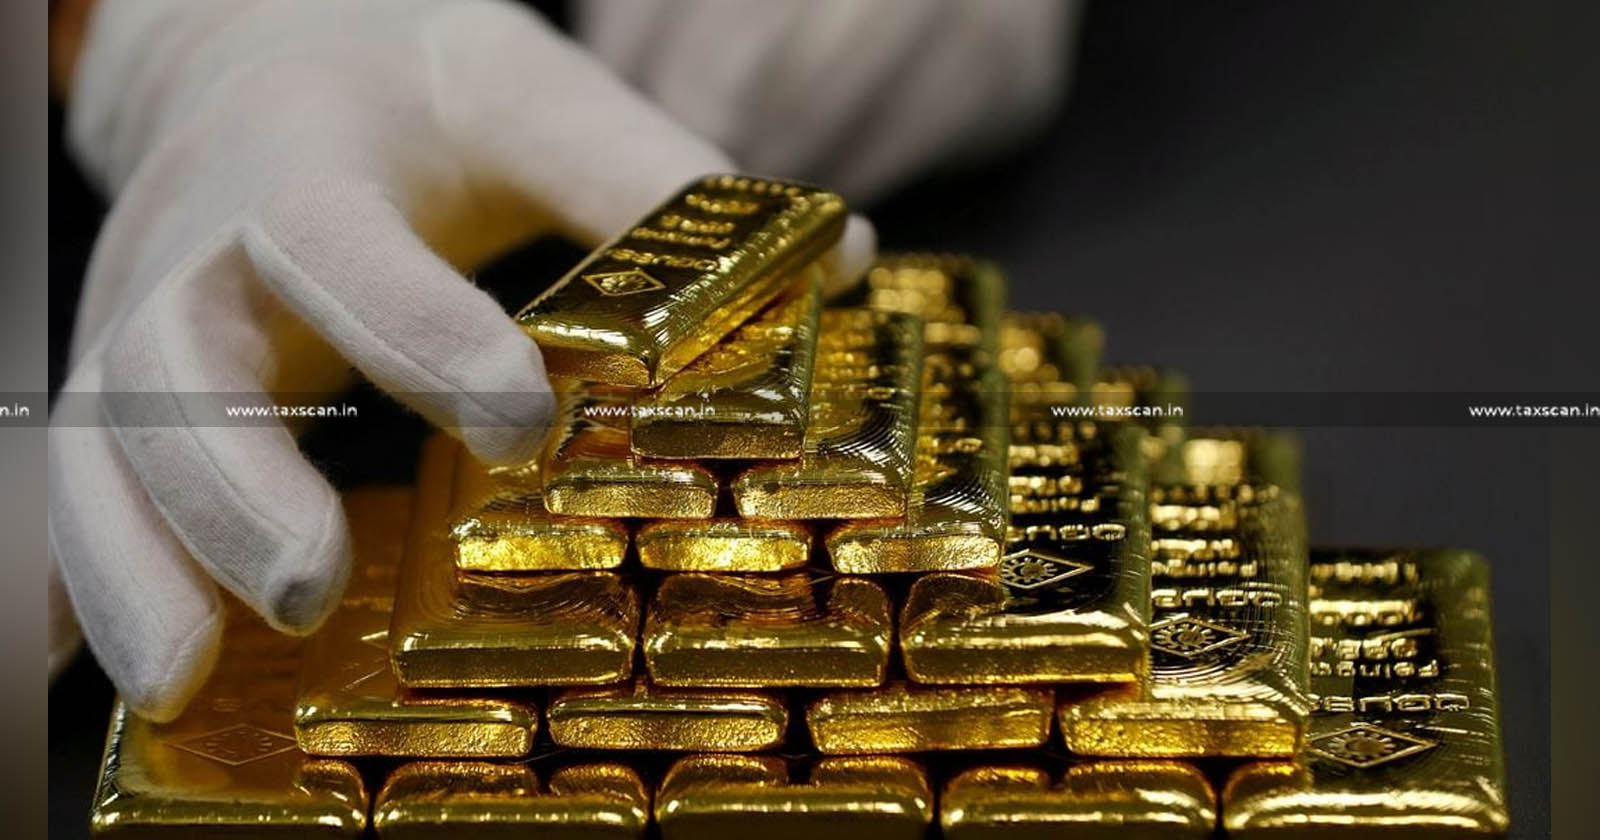 Delhi High Court - Delhi High Court Refuses to Enhance Bank Guarantee Demand - Bank Guarantee Demand - Seized Gold Imported after Export for Exhibition - Seized Gold - Exhibition - Export - Taxscan